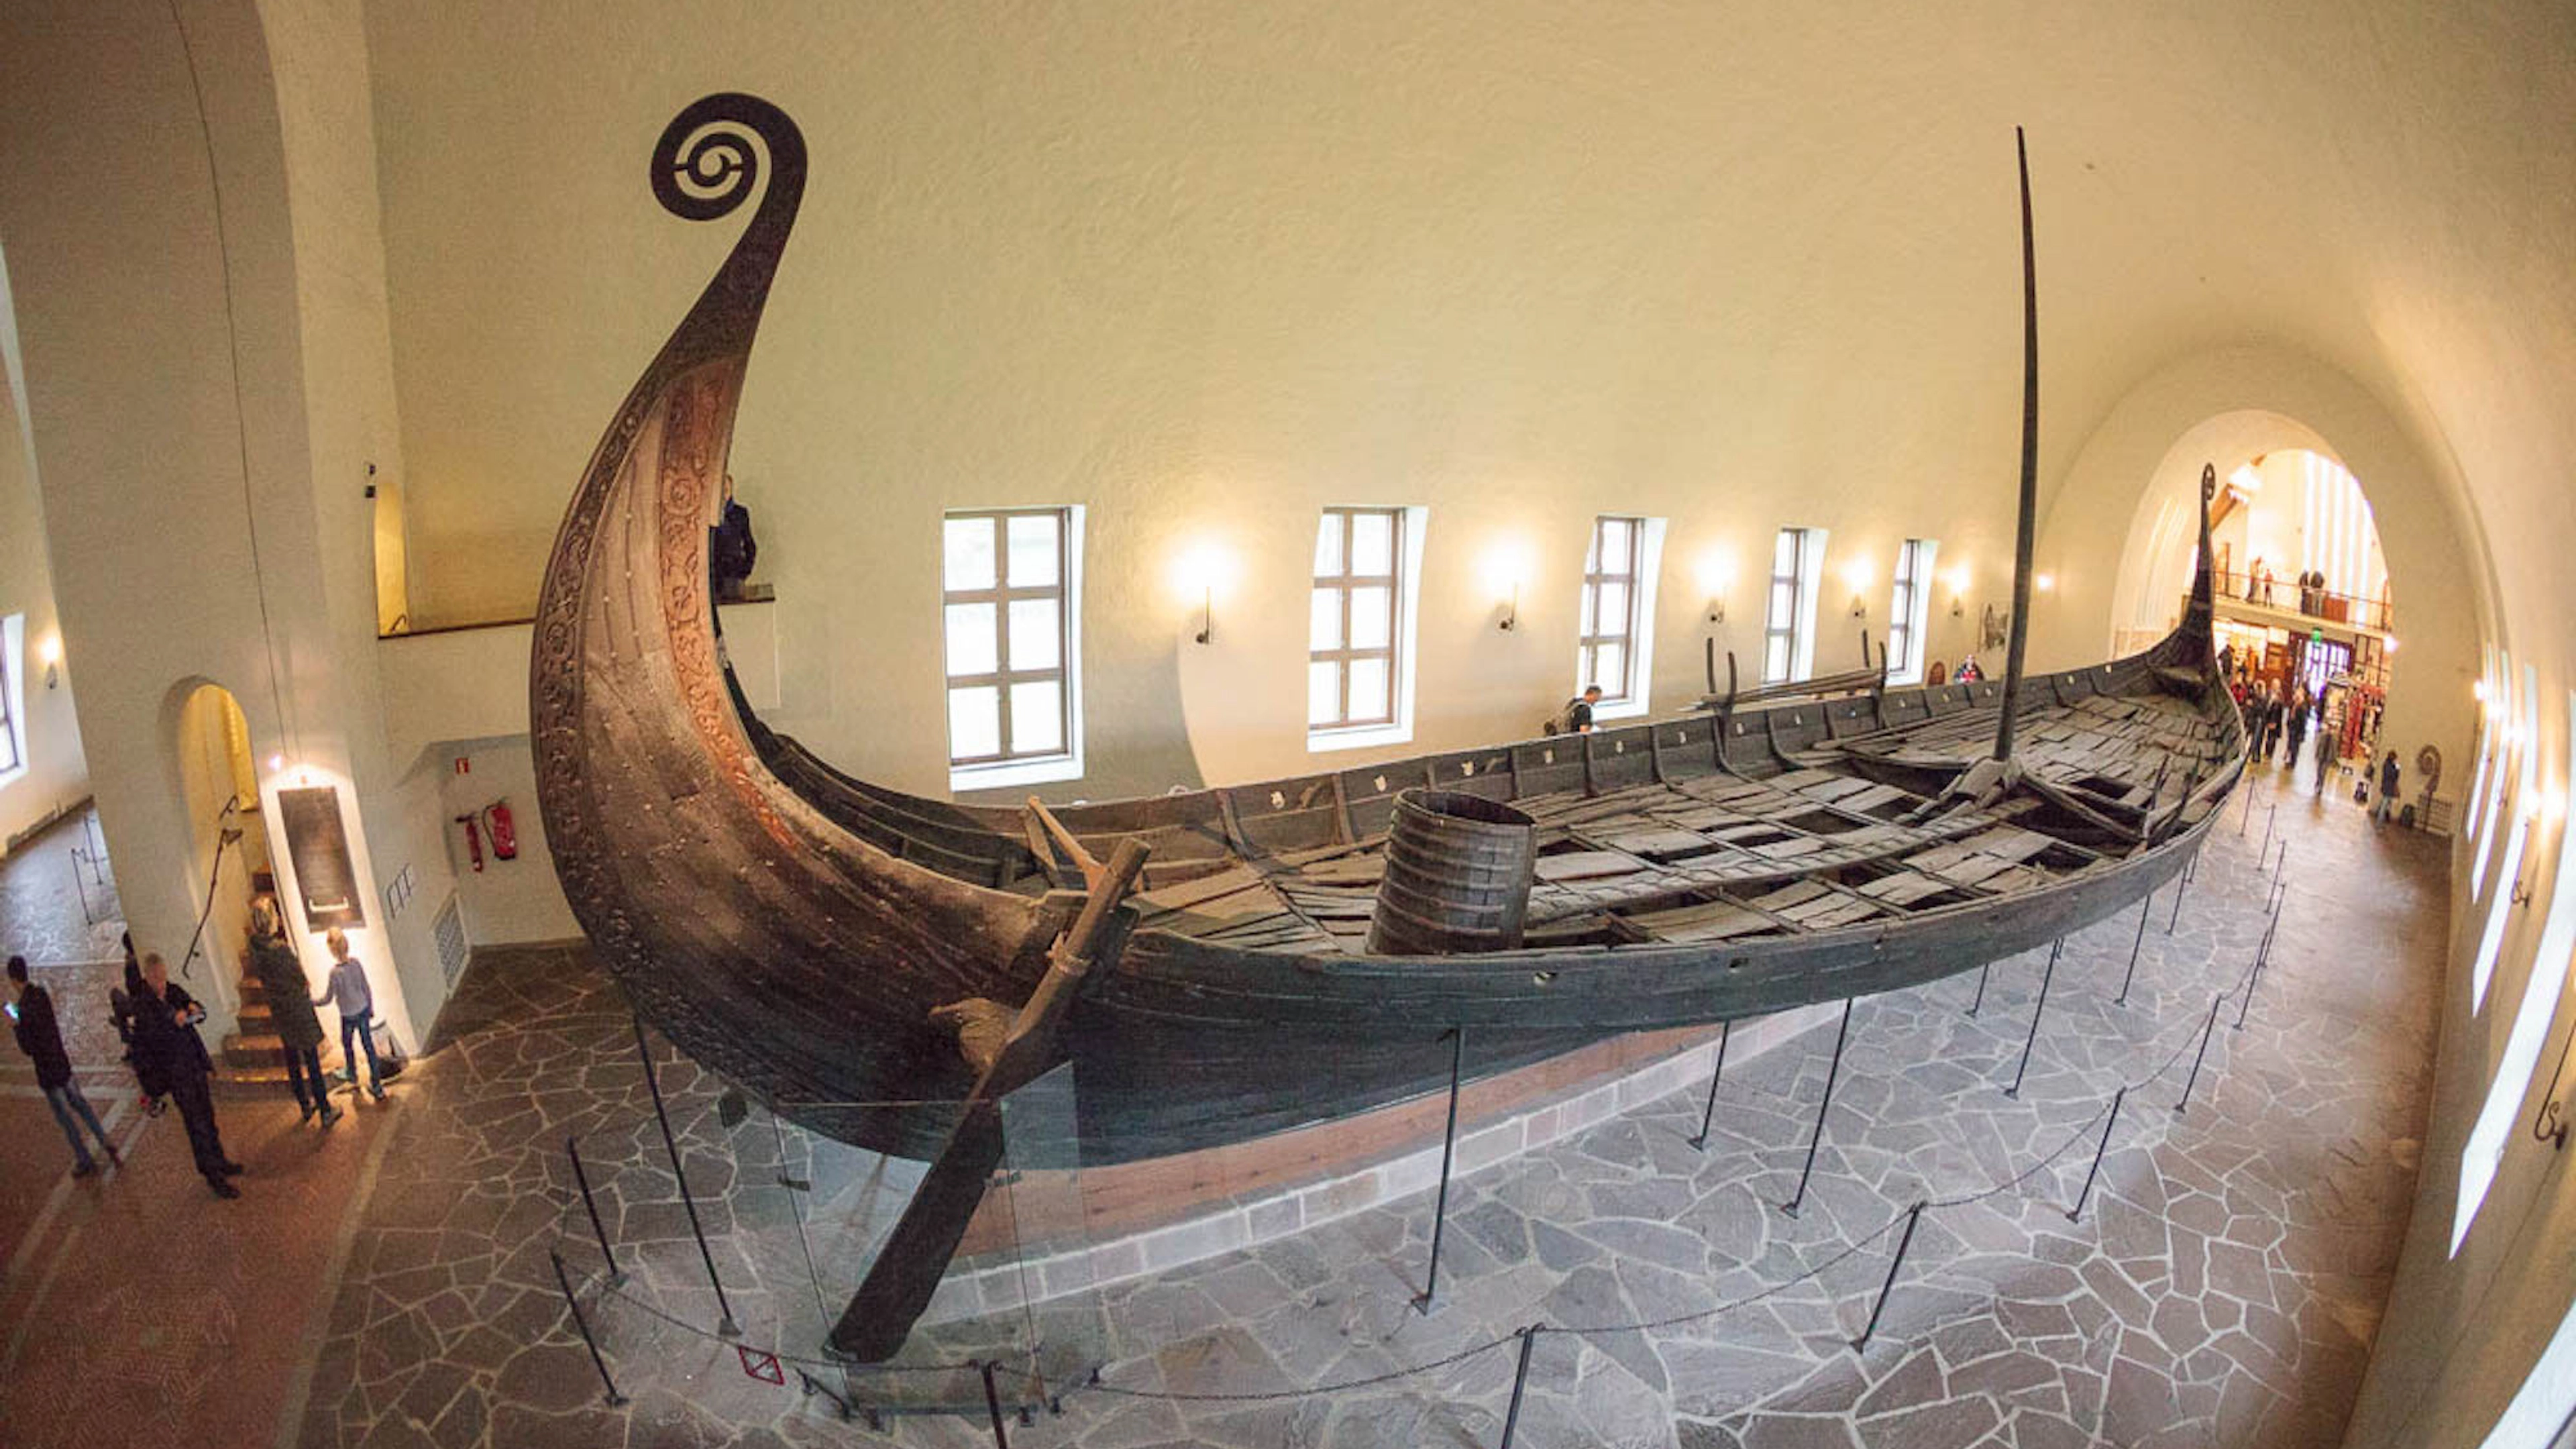 Vikingship Museum in Oslo - Go Viking with Fjord Tours , Oslo, Norway